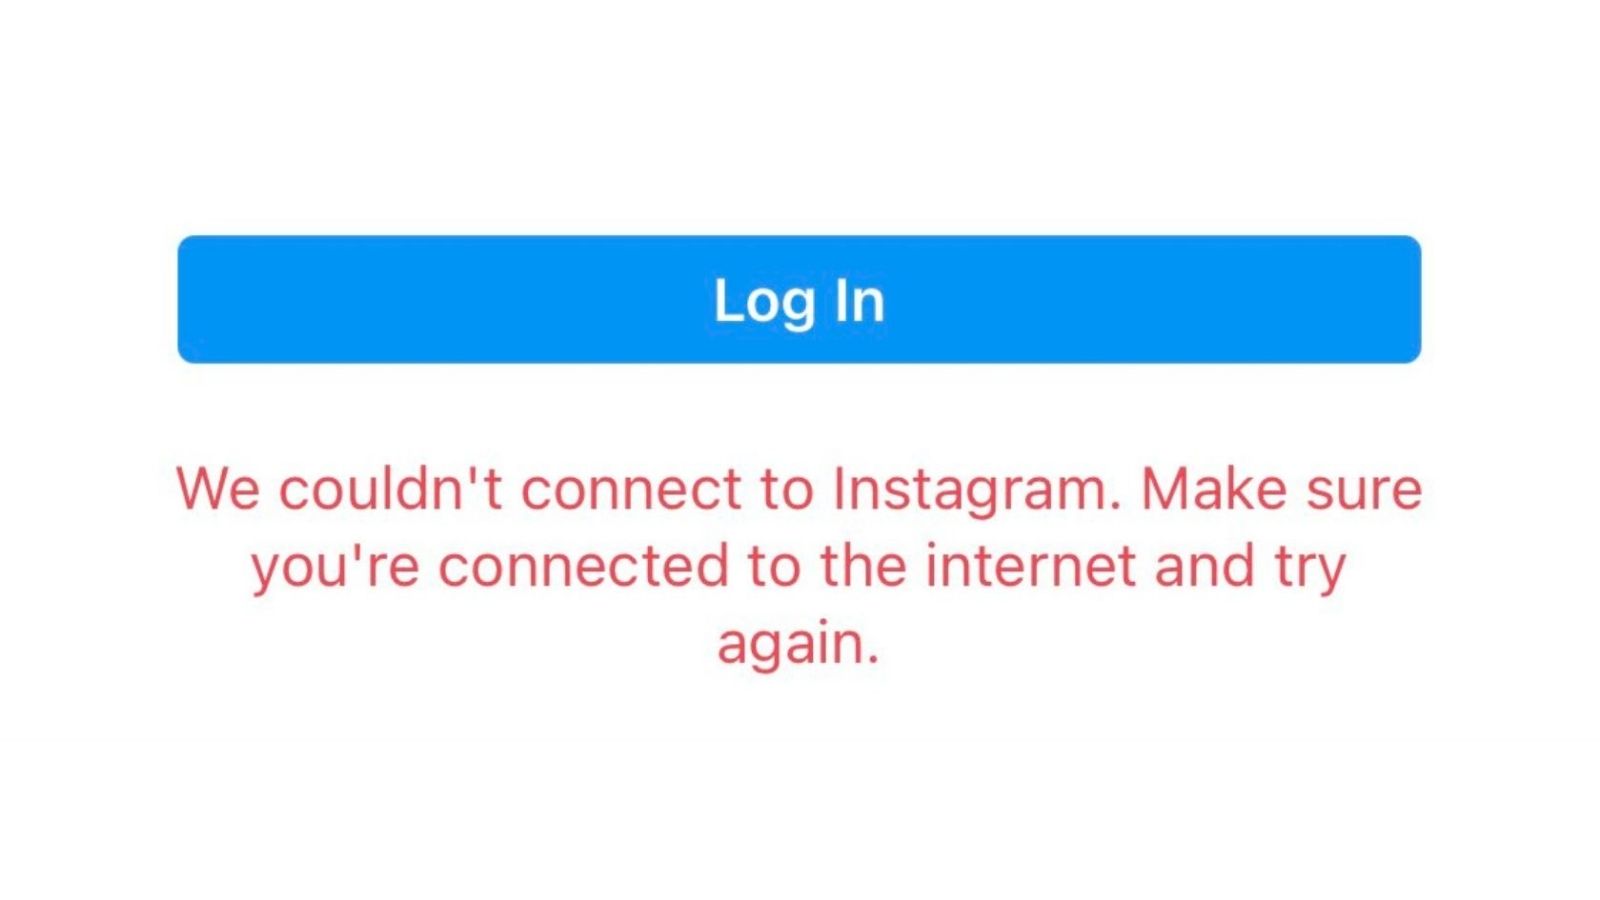 We Couldn't Connect to Instagram. Make Sure You're Connected to the Internet and Try Again.